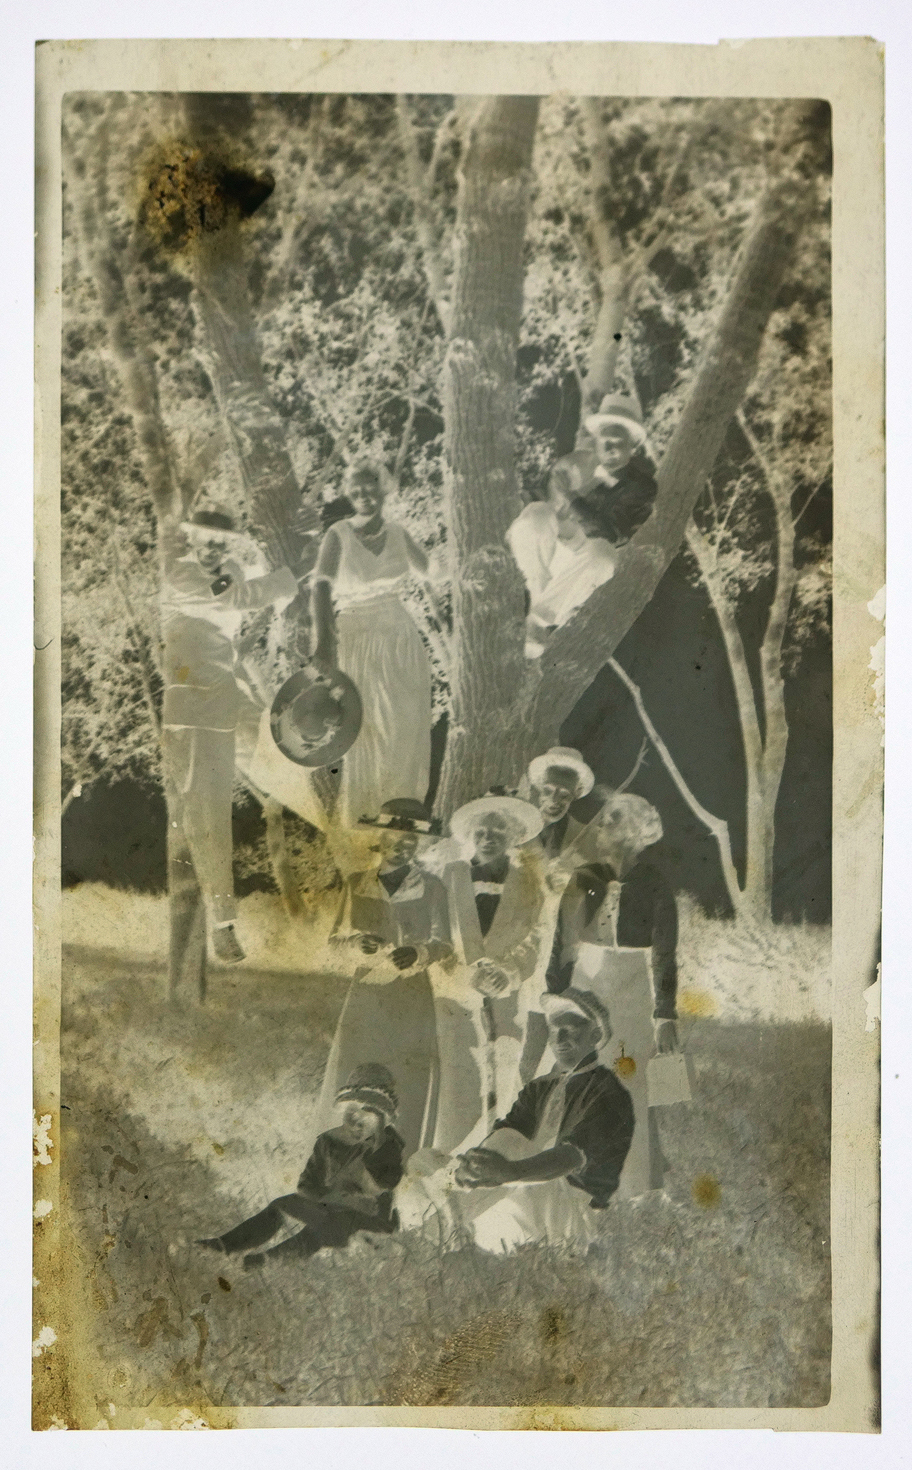 Old film negative shows nine jovial people collected in period clothes gathered around a tree, with a few people in the branches of the tree.